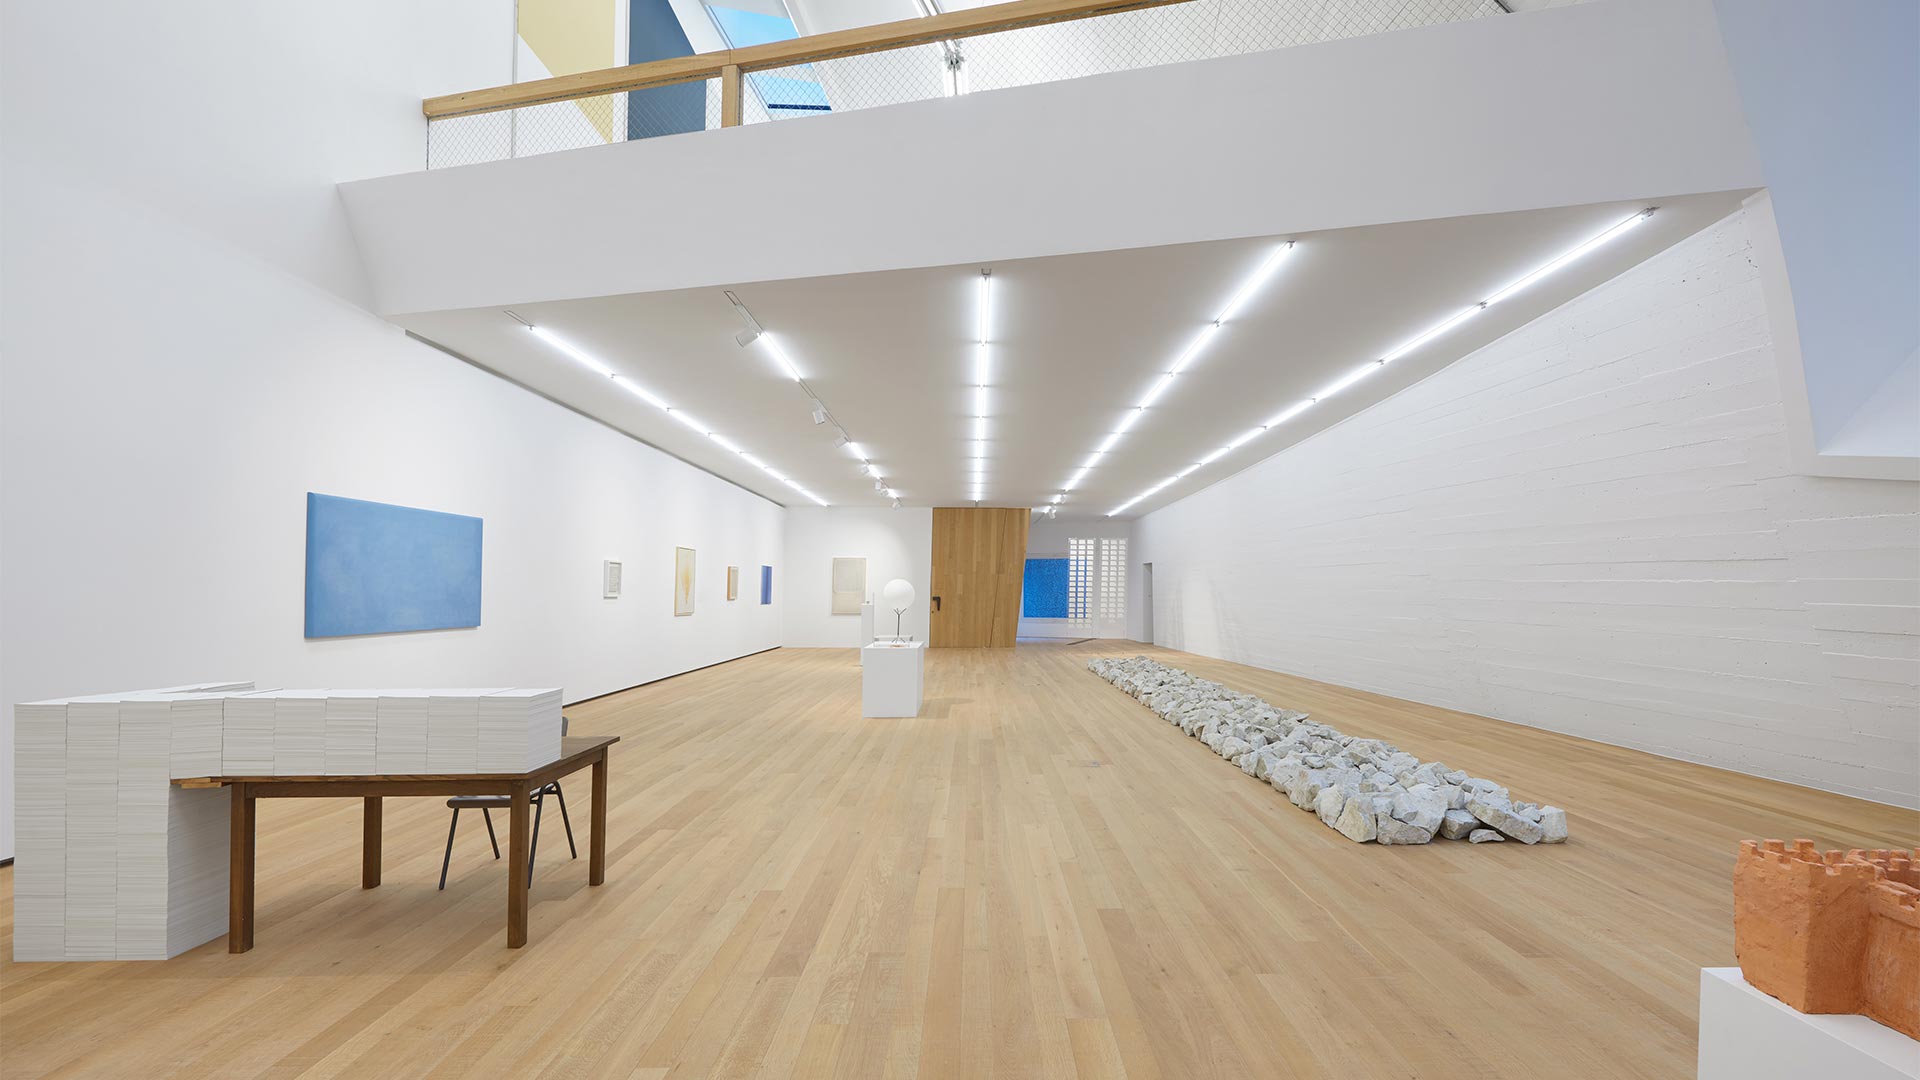 An LED-lit museum room, decorated with contemporary art paintings to welcome visitors.